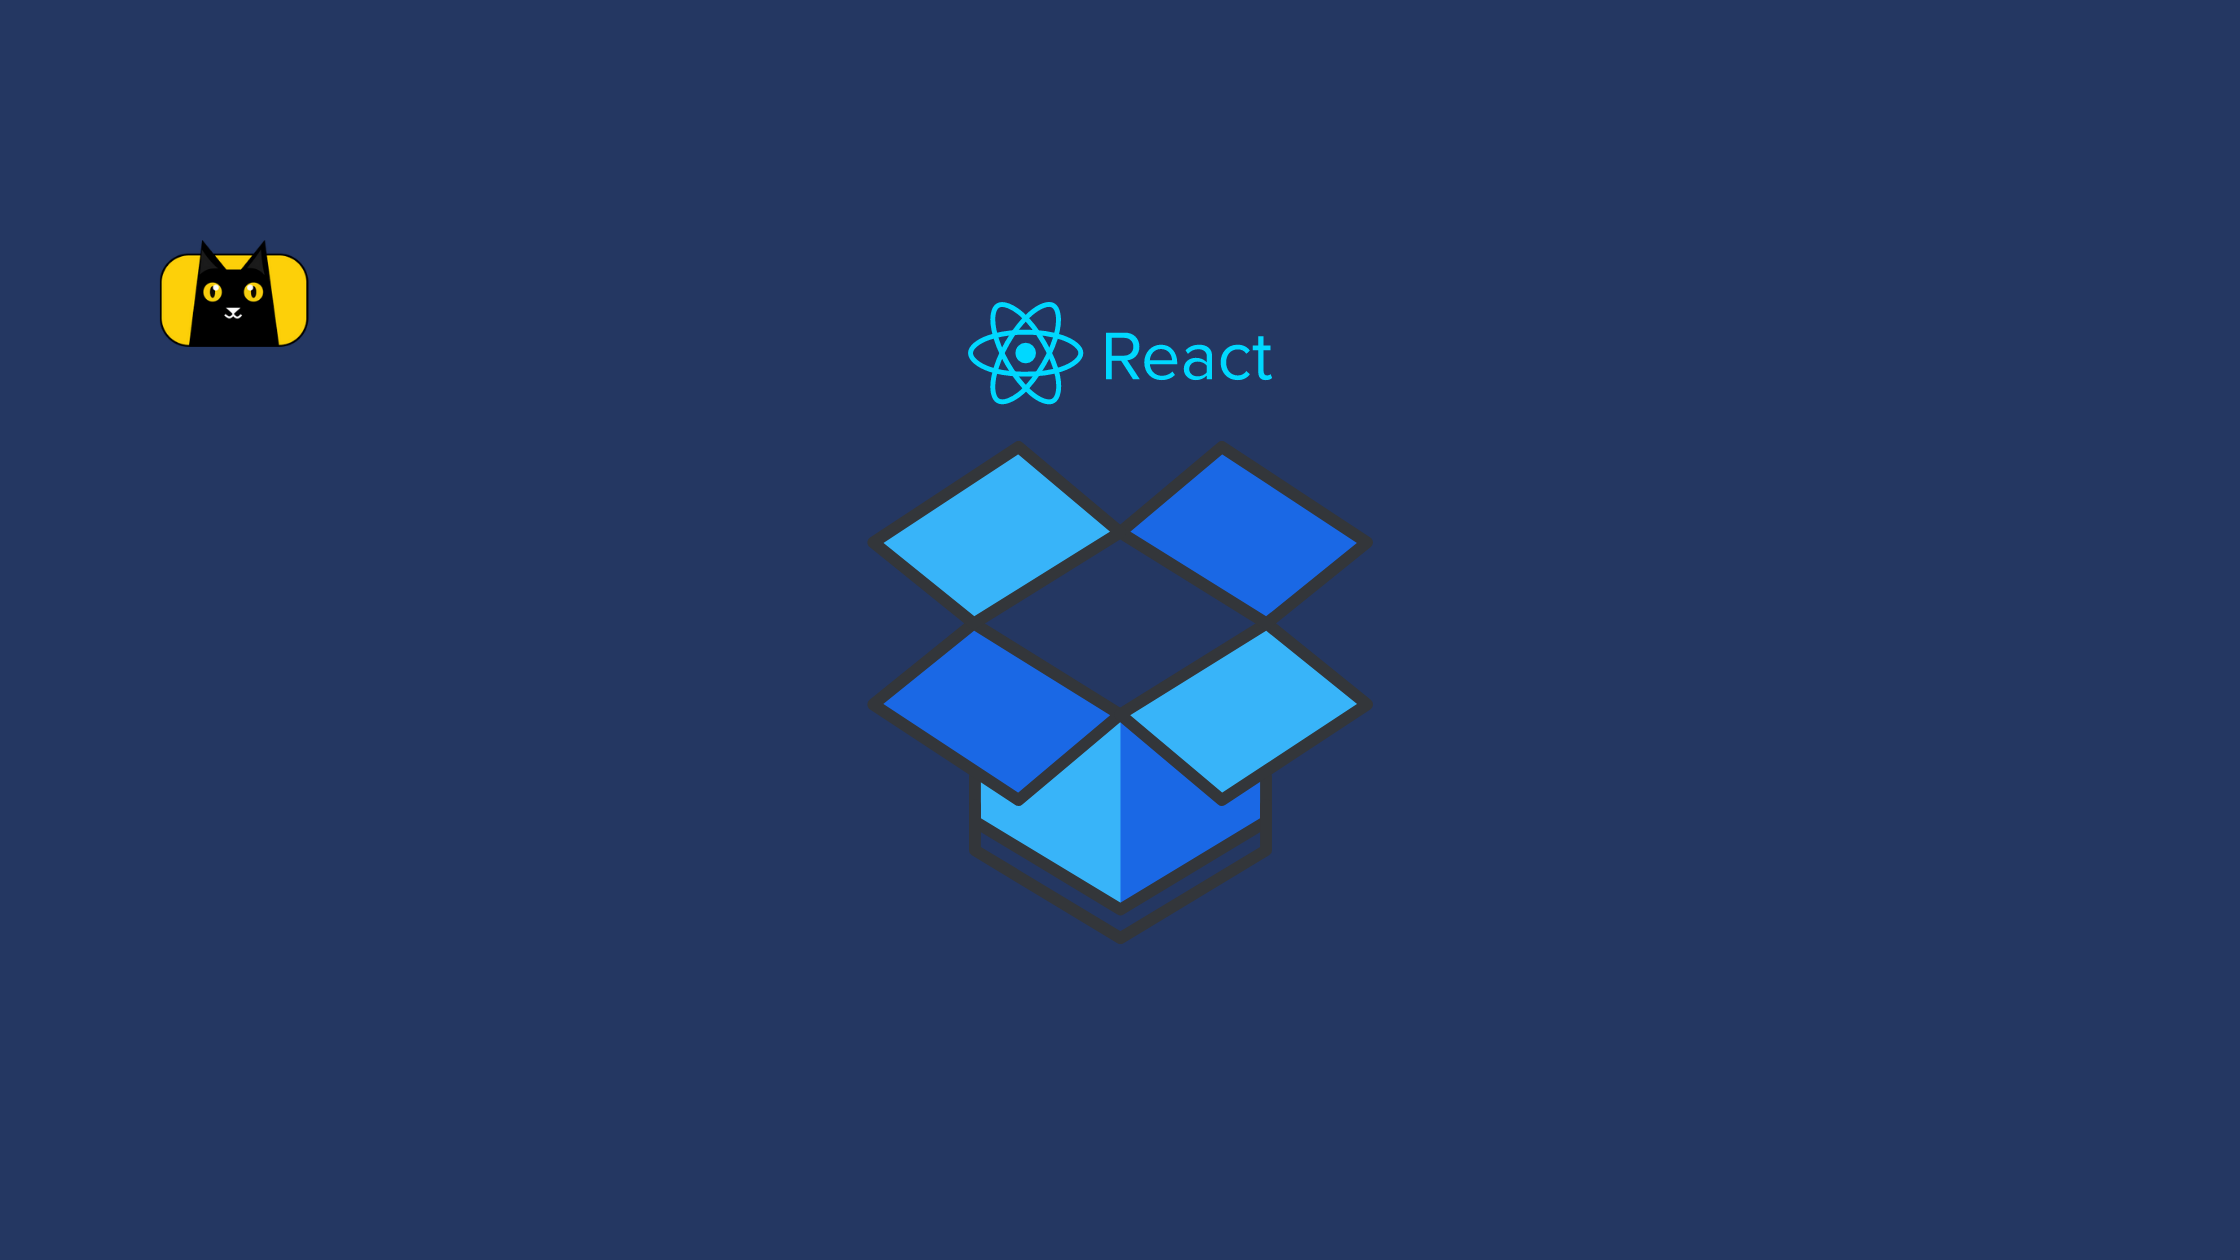 A picture of a box, a React logo, and a CopyCat logo.